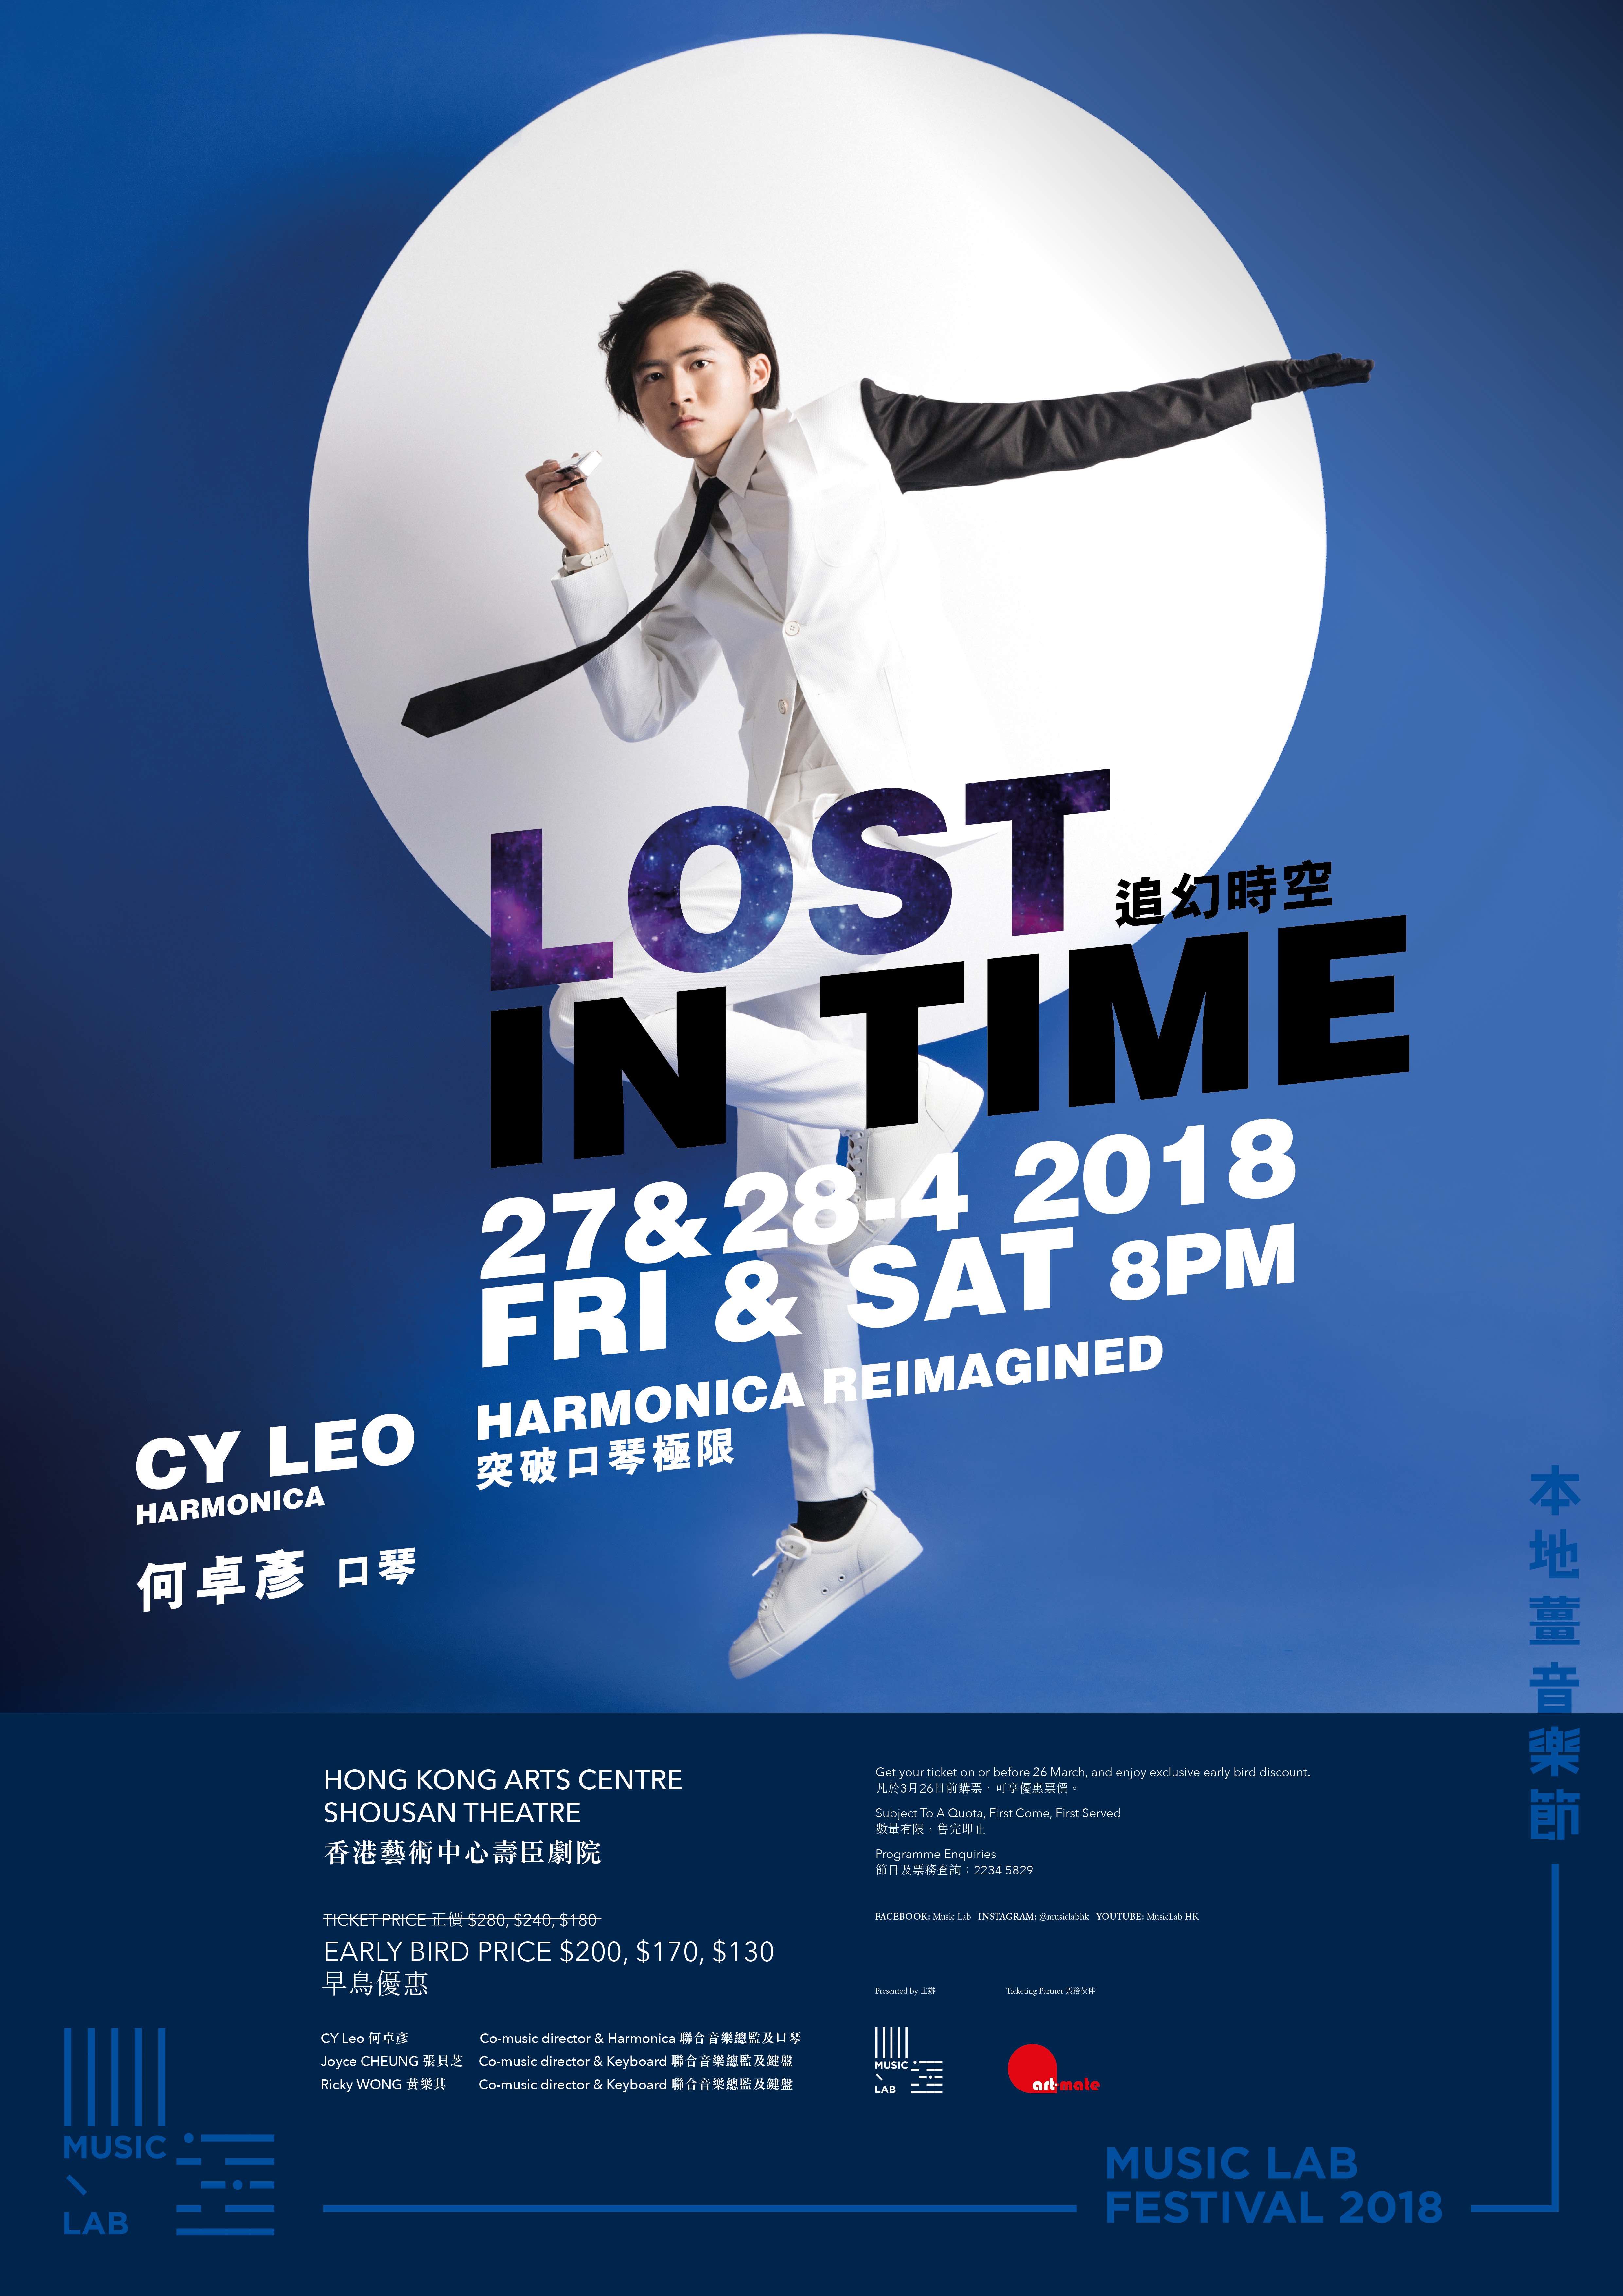 Lost in Time runs from April 27 to 28